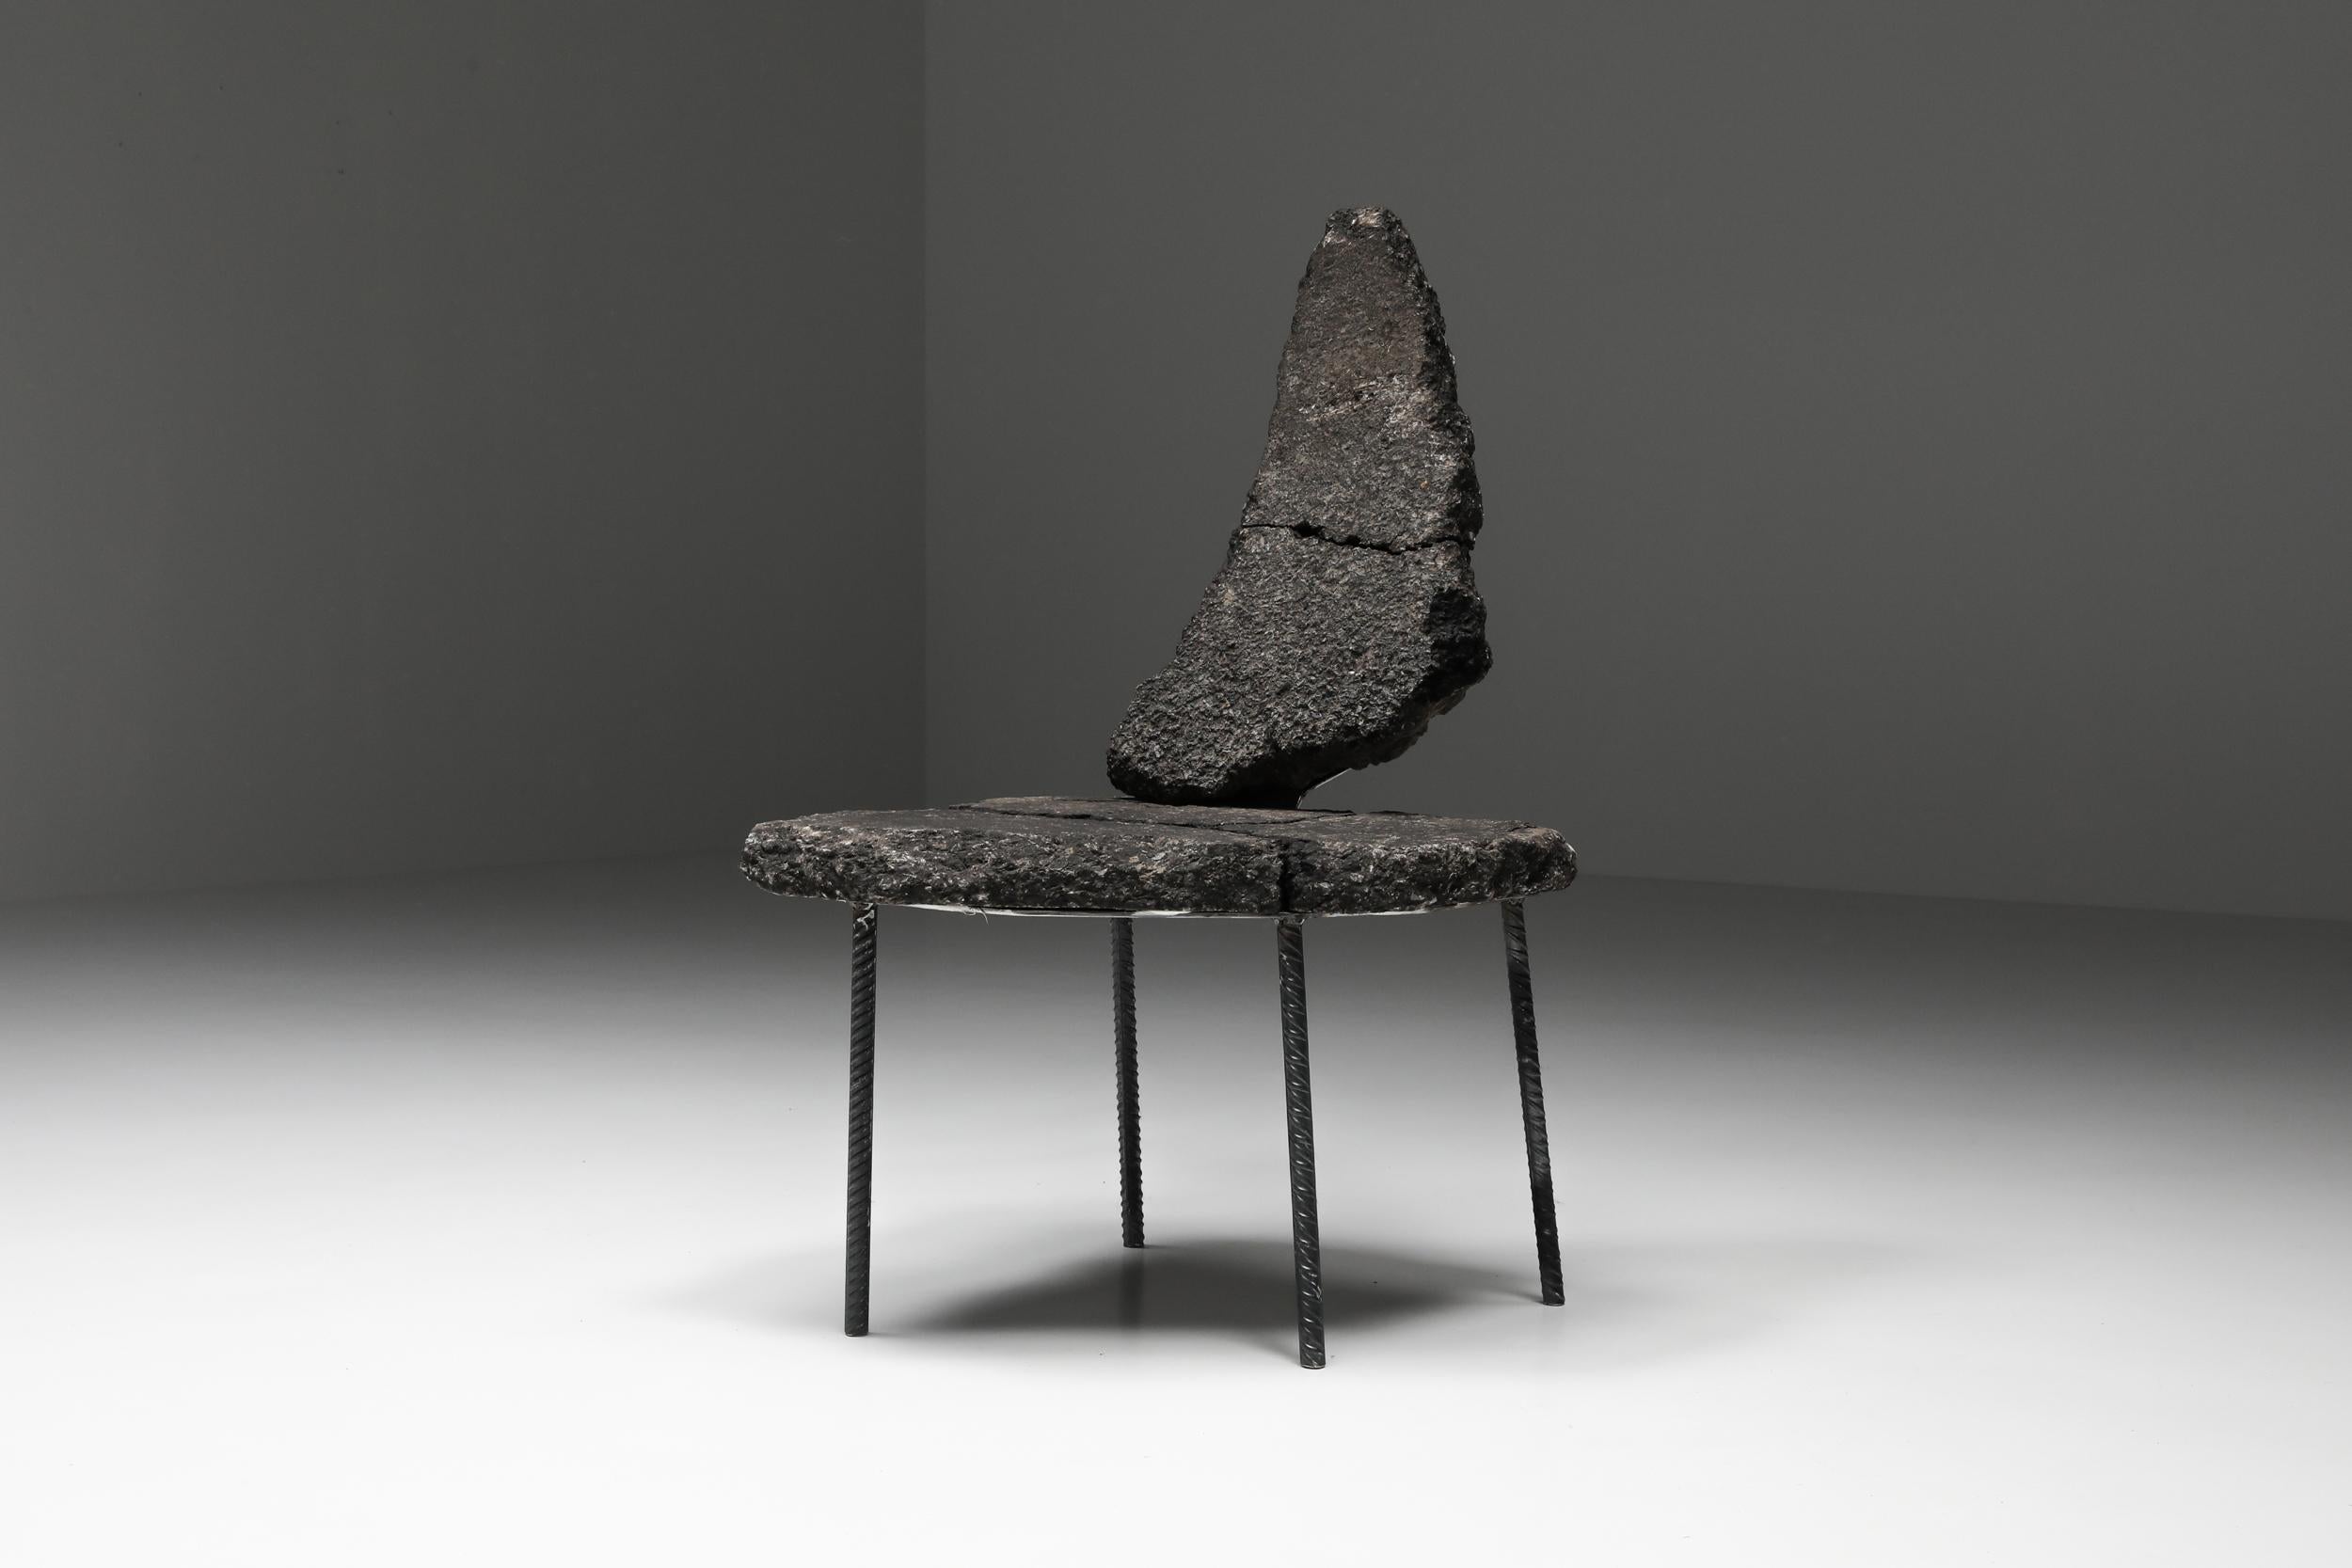 Metal Contemporary Chair by Lionel Jadot 'Lost Highway' Belgian Art and Design Basel For Sale